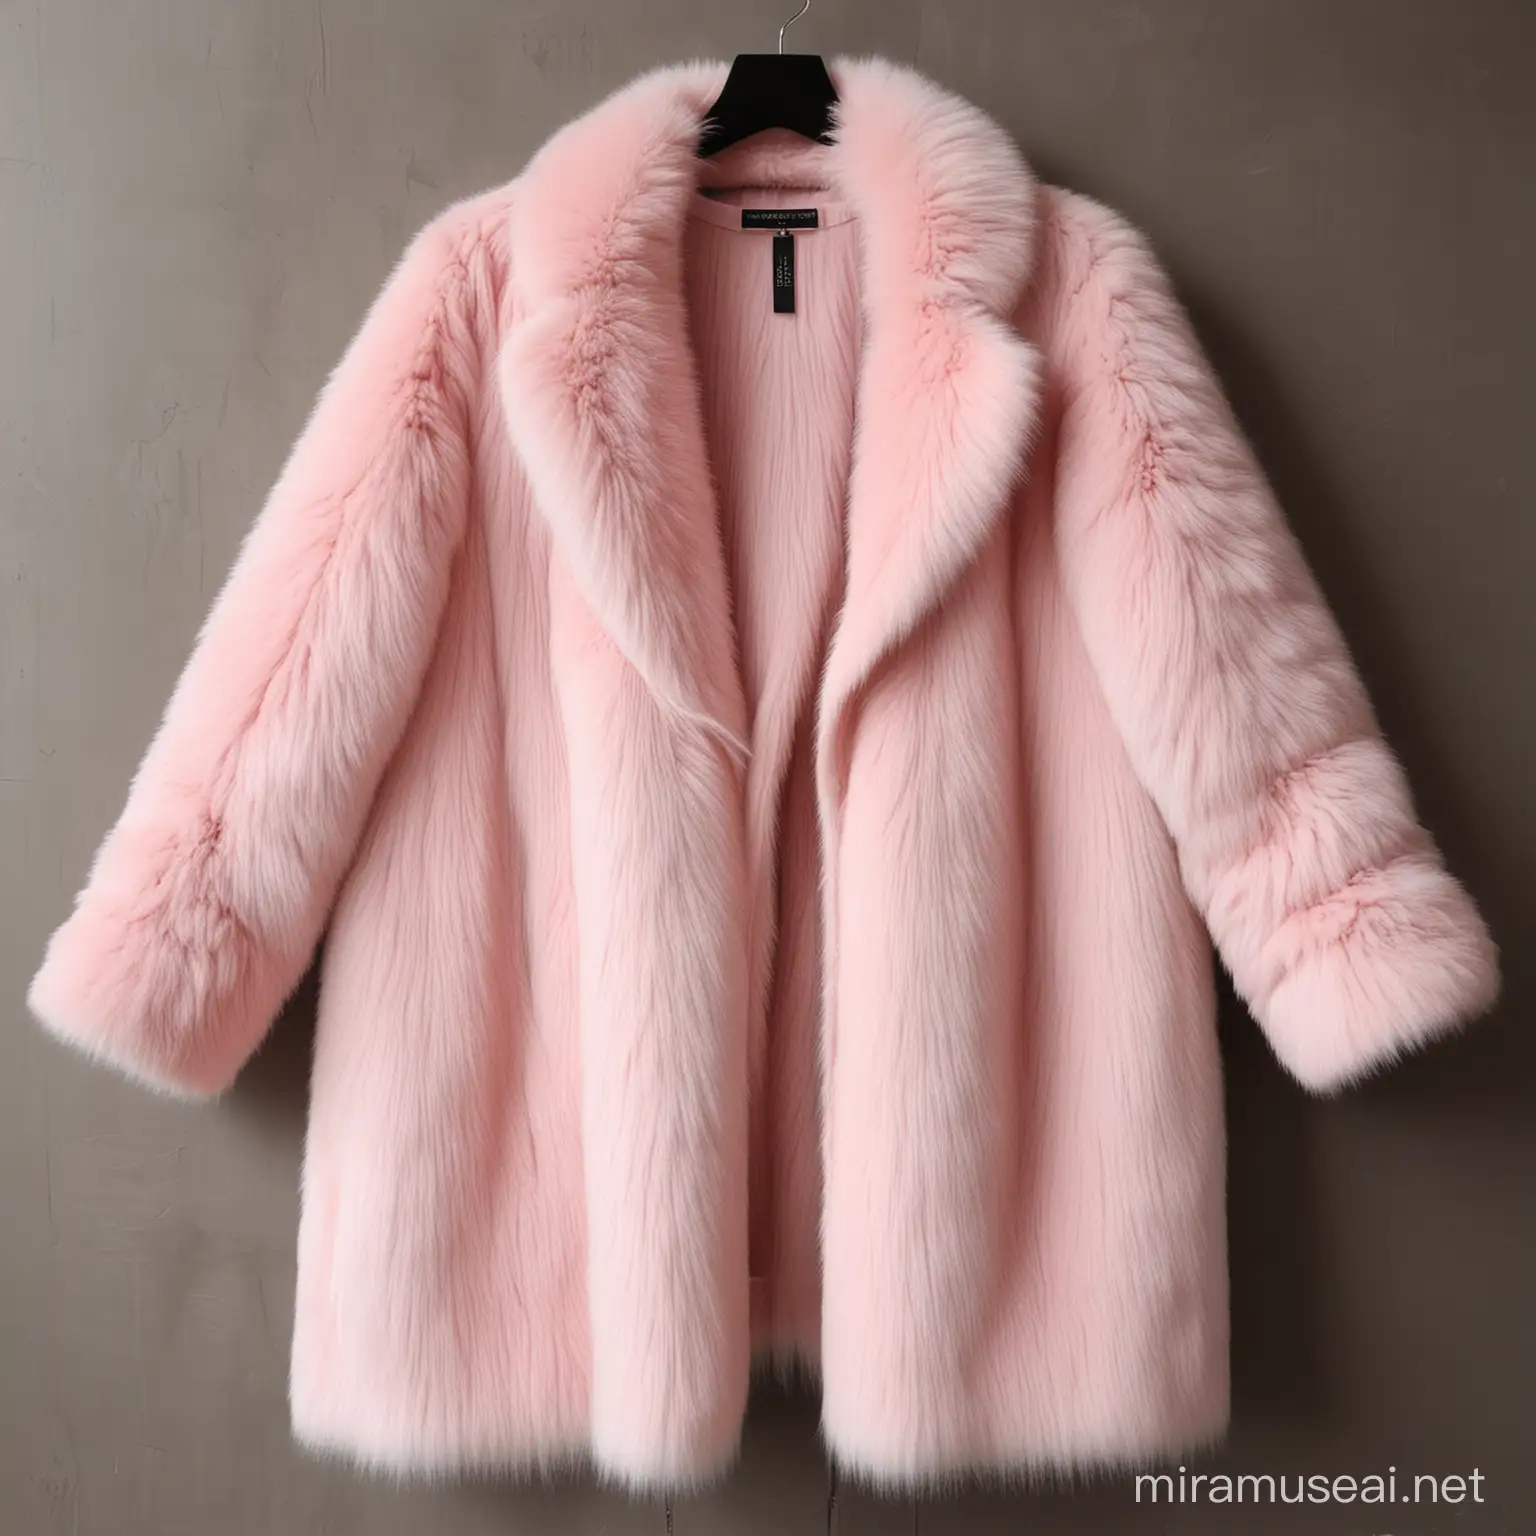 Bohemian long luxury fur coats with leather in color white pink red and black 